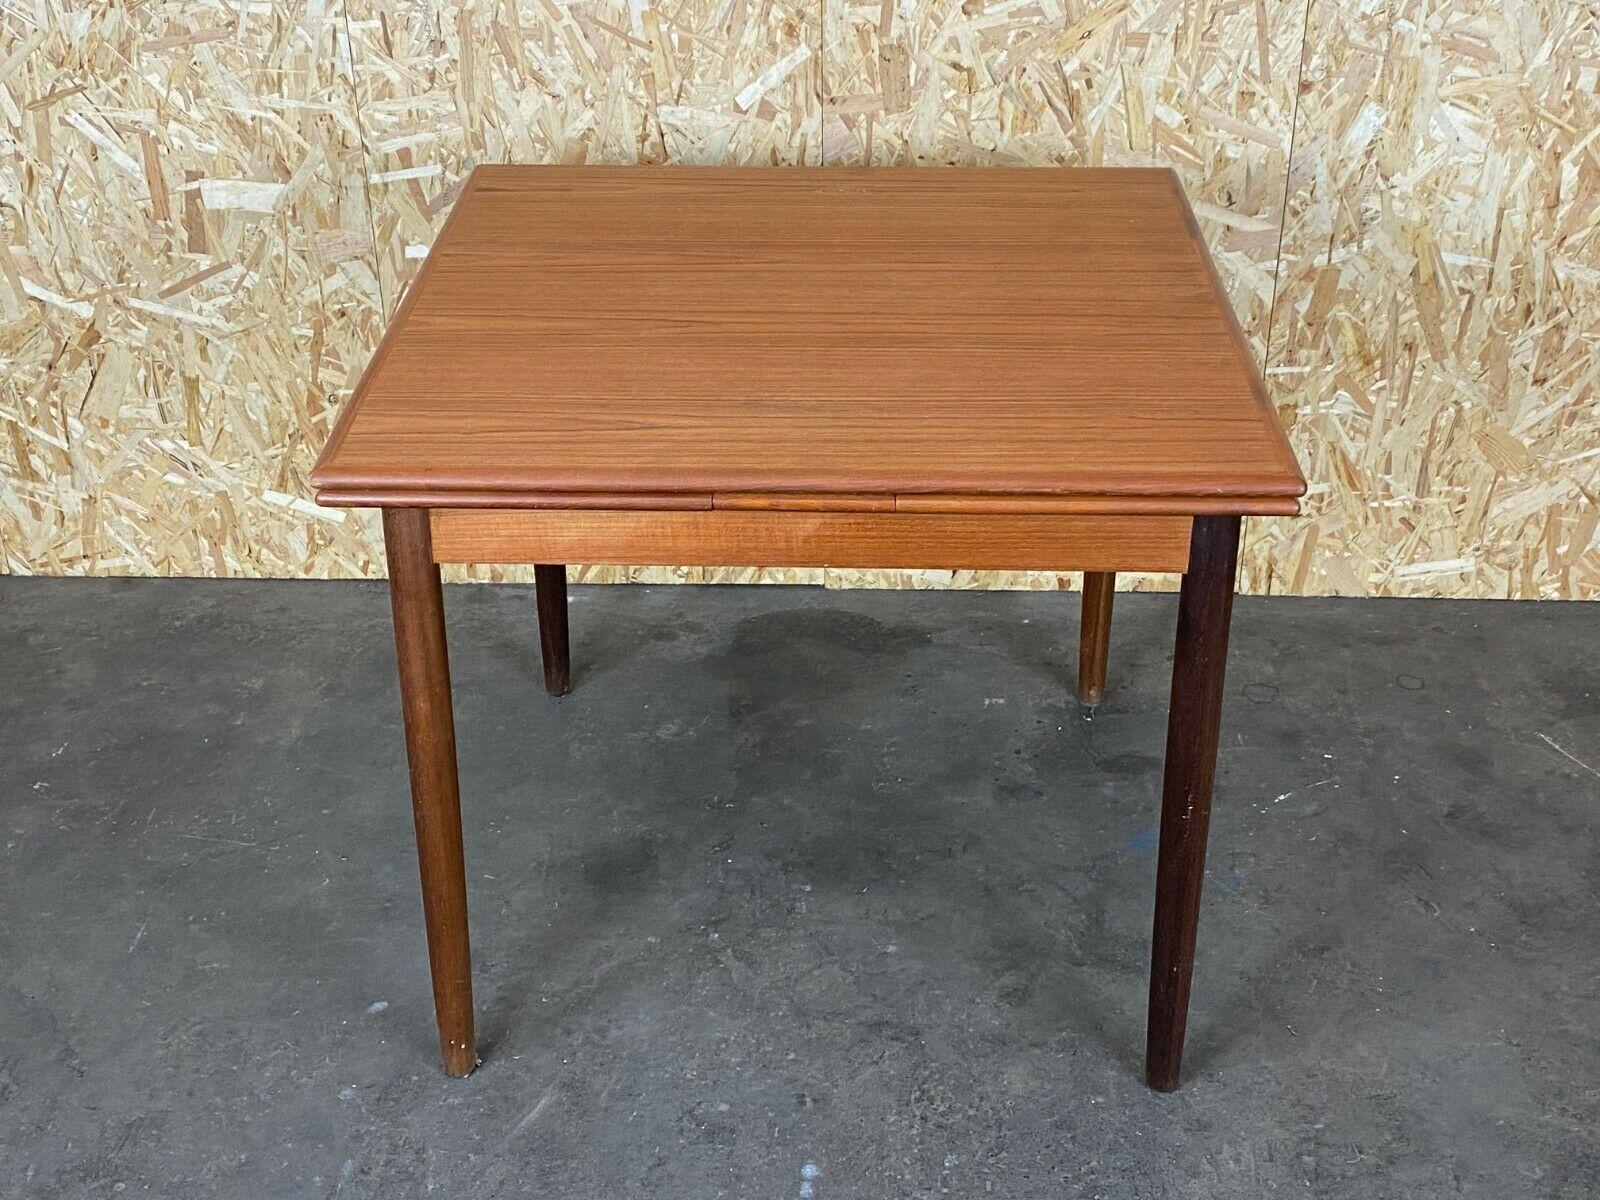 60s 70s teak dining table Dining Table Danish Modern Design Denmark 60s 70s

Object: dining table / dining table

Manufacturer:

Condition: good - vintage

Age: around 1960-1970

Dimensions:

(+ 2x 35cm) 86.5cm x 86.5cm x 75cm

Other